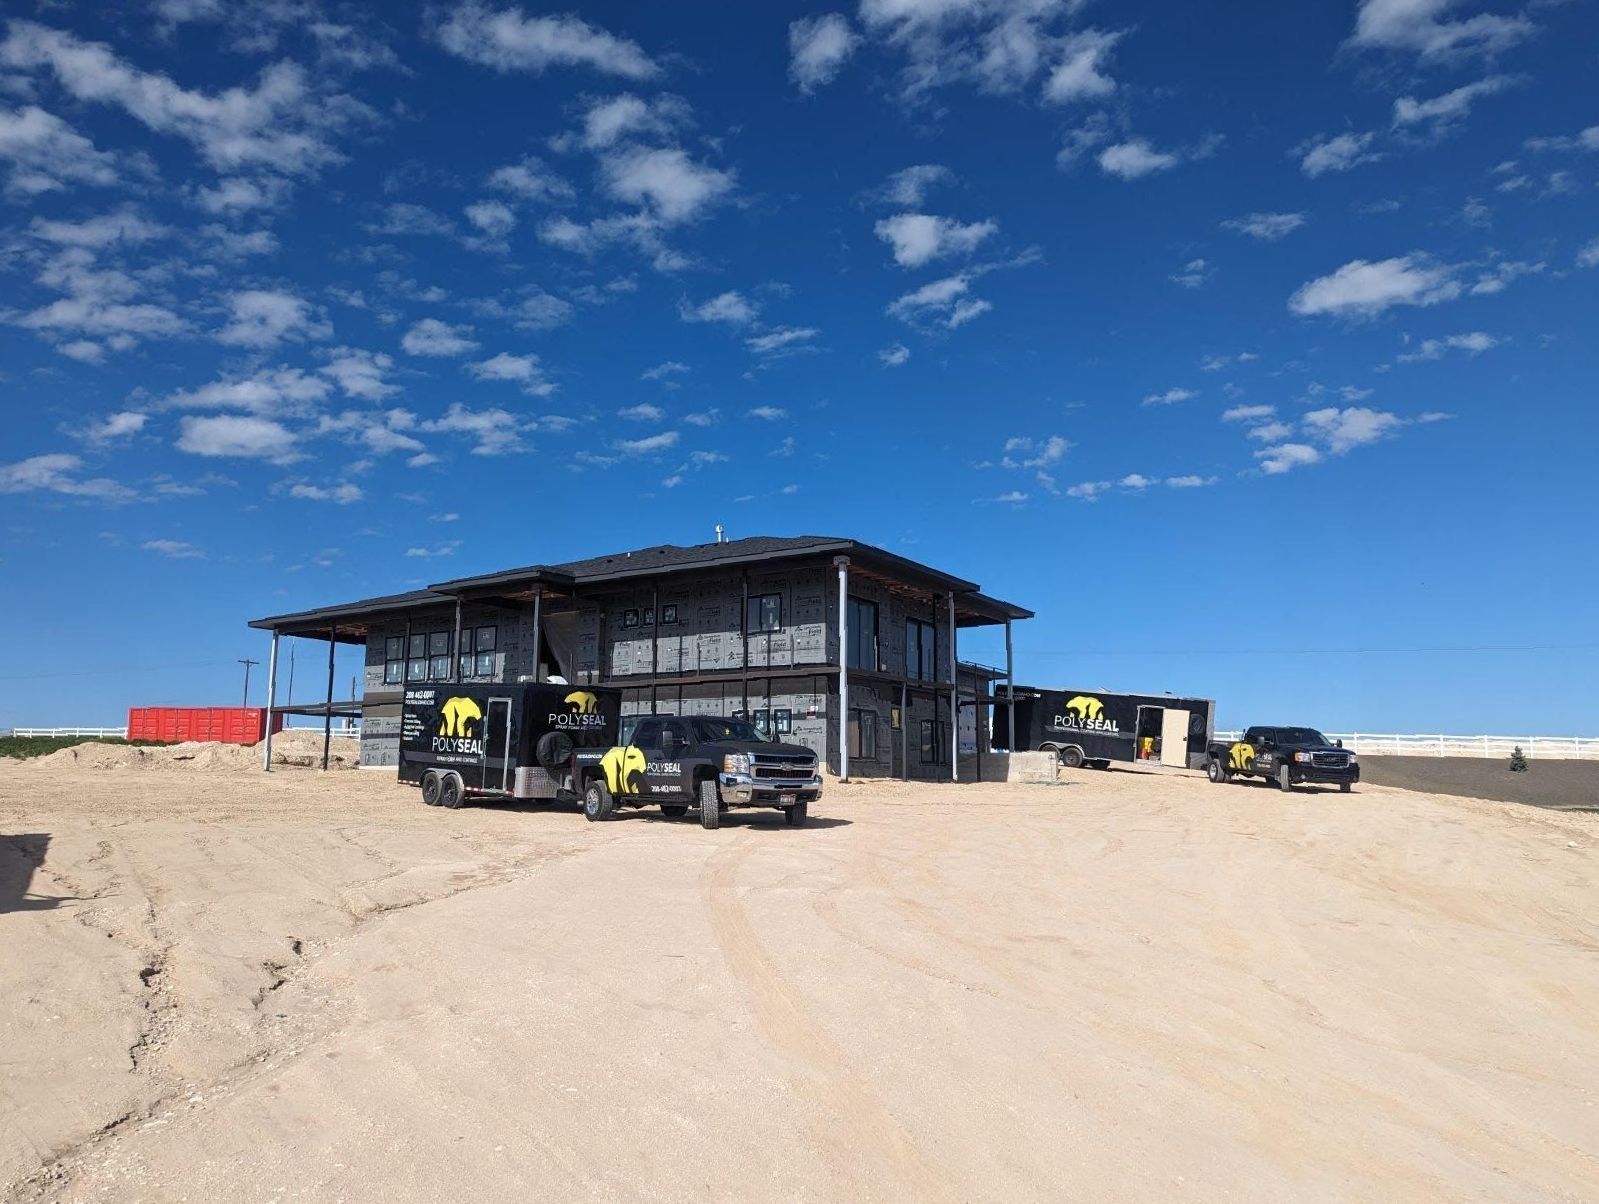 A large house is being built in the desert with trucks parked in front of it.